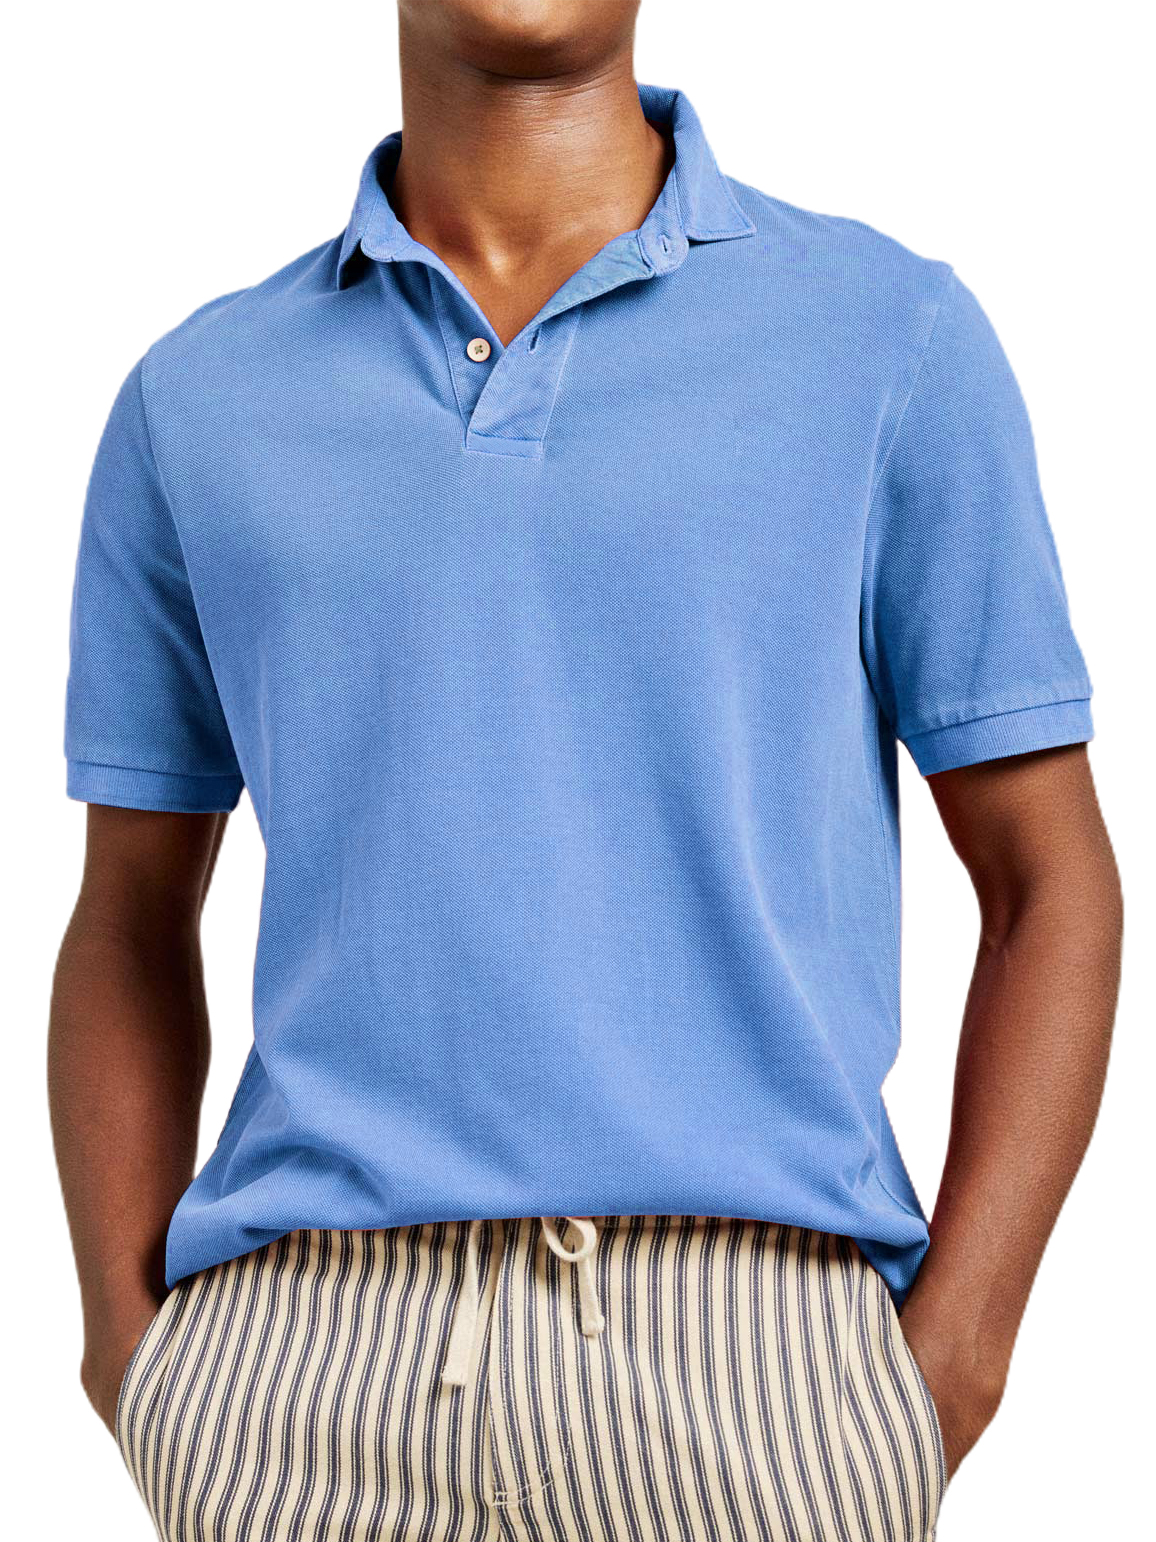 Men's Casual Basic Solid Color Short Sleeve Polo Shirt